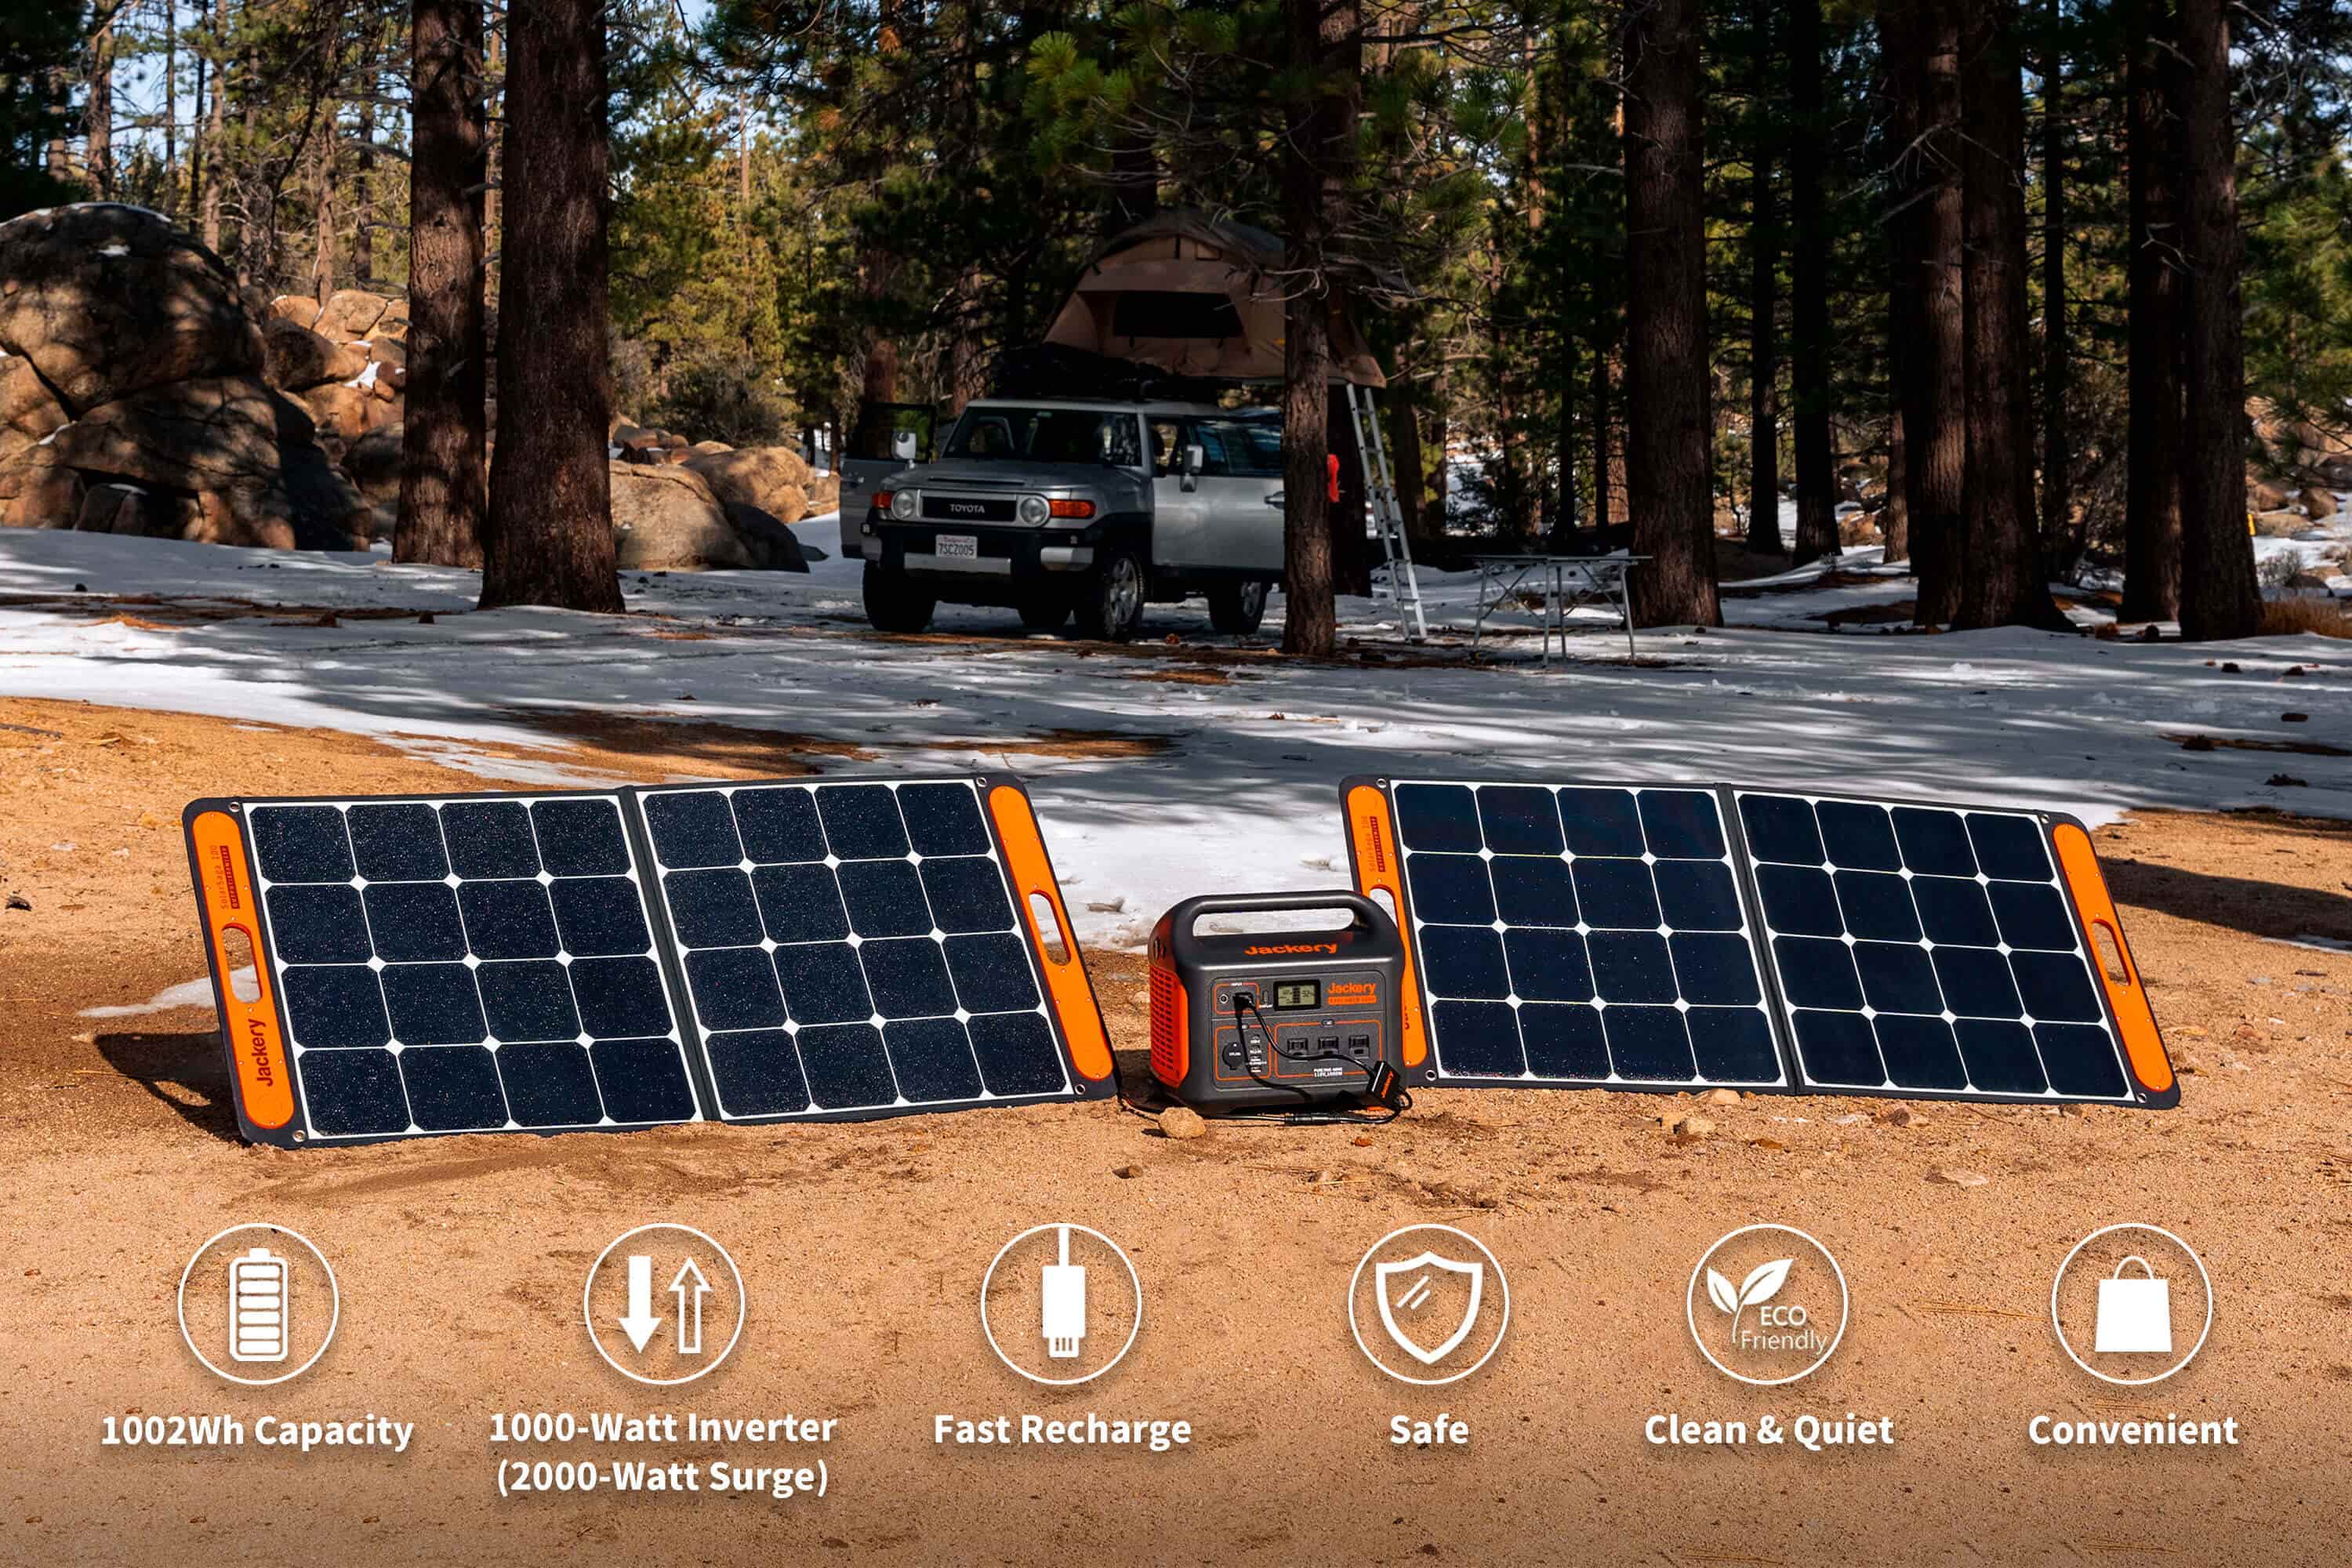 20% OFF on Jackery Solar Generator 1000 (Explorer 1000 Portable Power Station with 2 * 100W Solar Saga Panels) Normal Price $1699 Sale Price $1319.20 Camping, Outdoors, Emergency